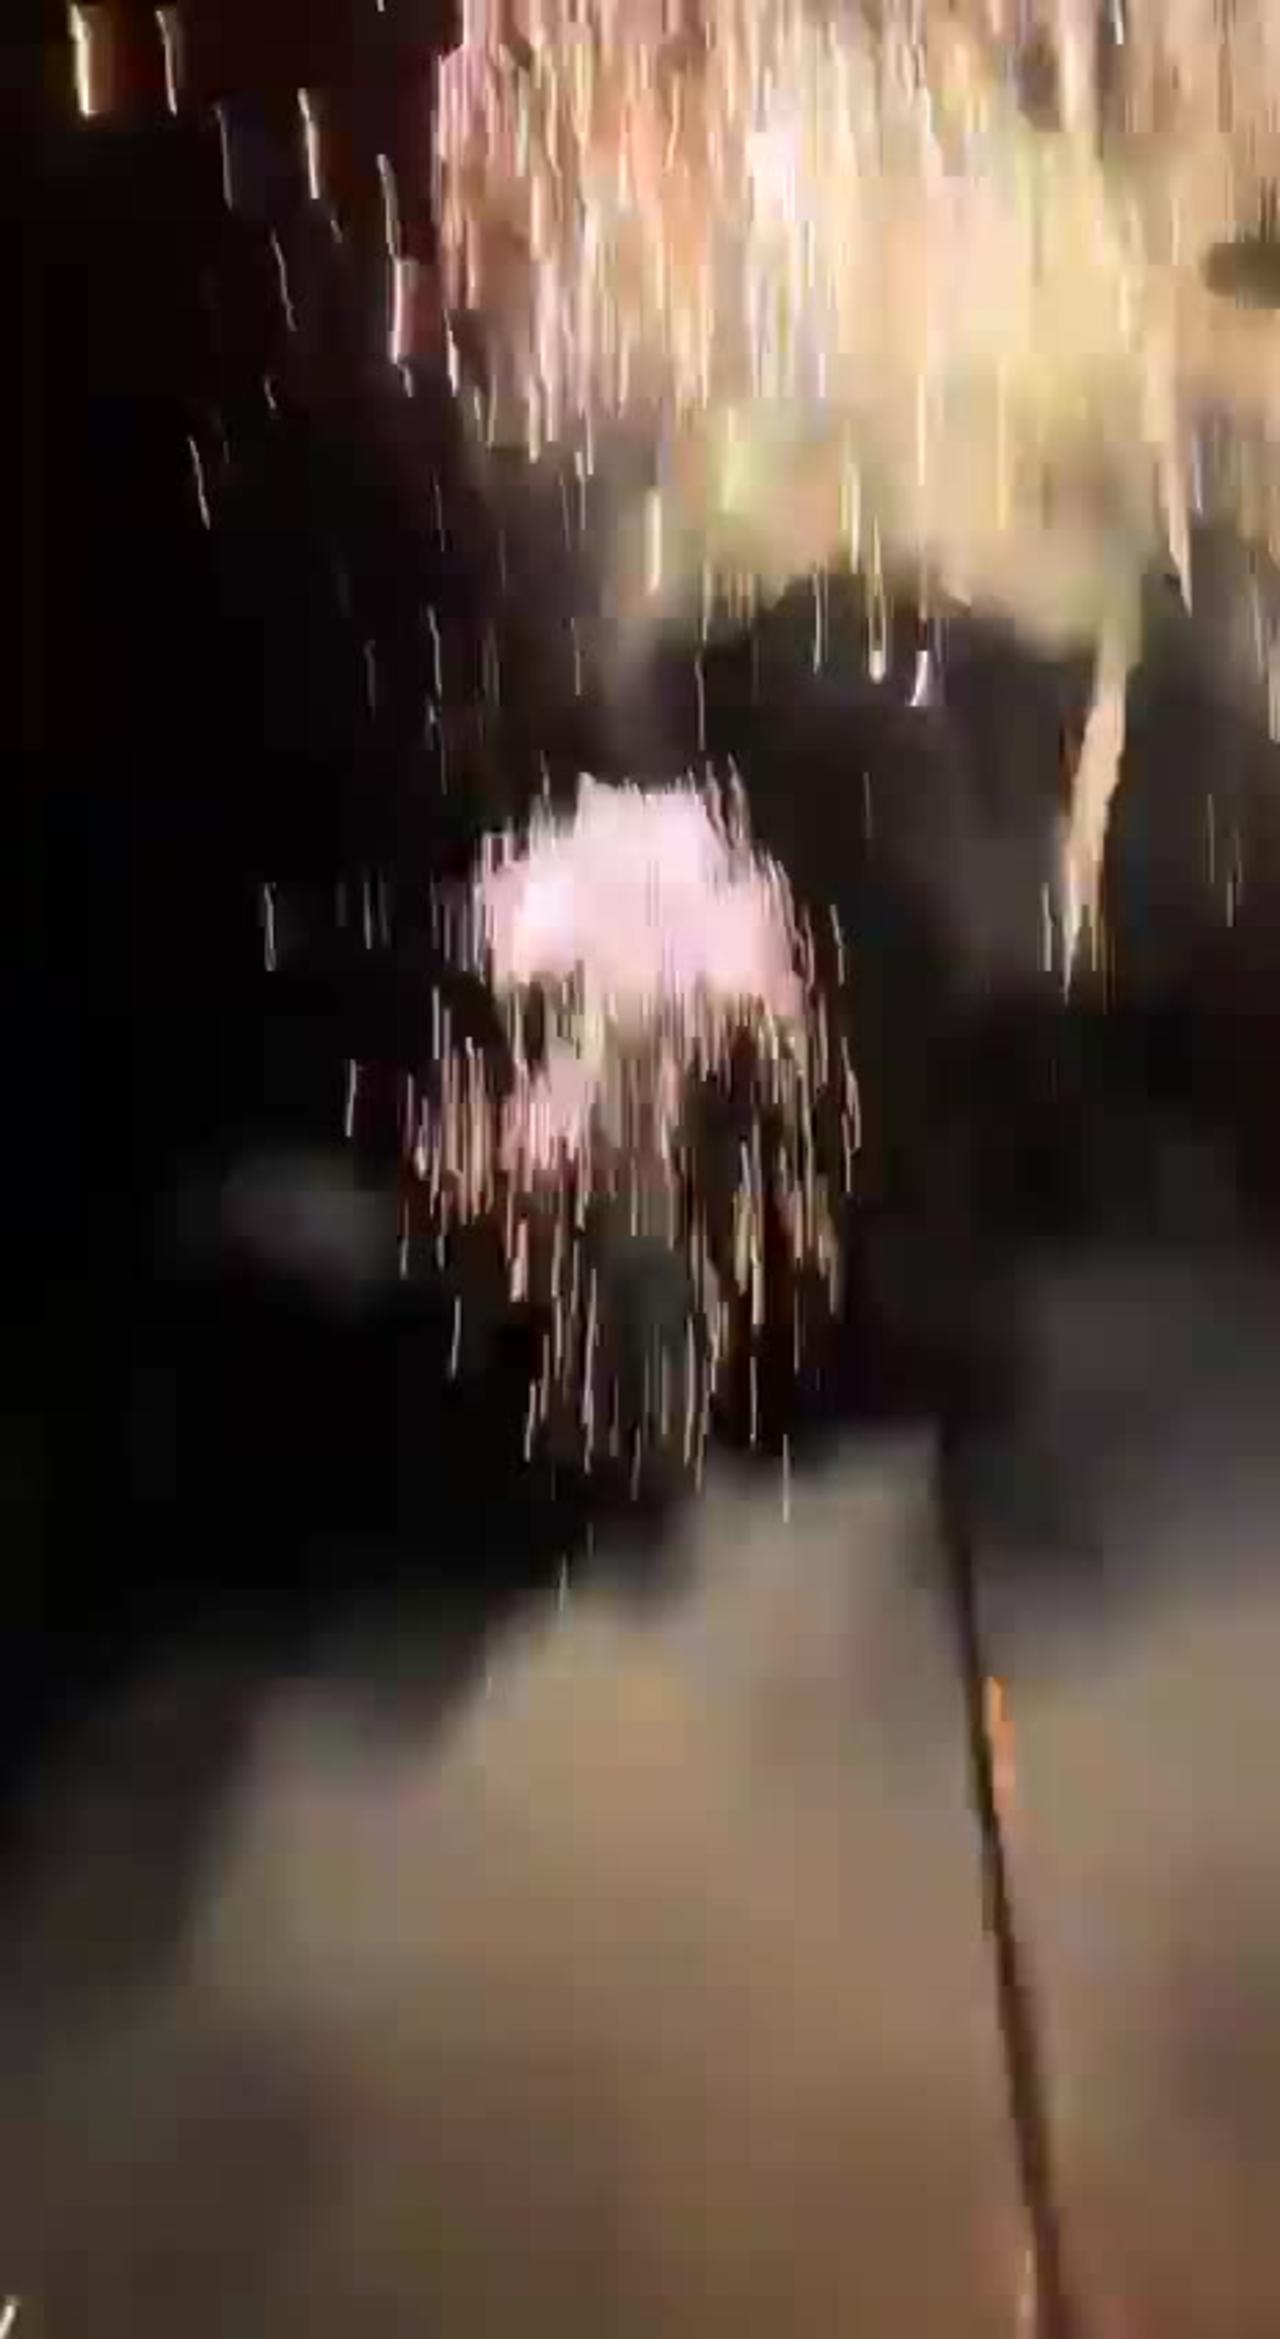 Arsenal ‘ultra’ fans set off fireworks at 2am outside the hotel of the Man City